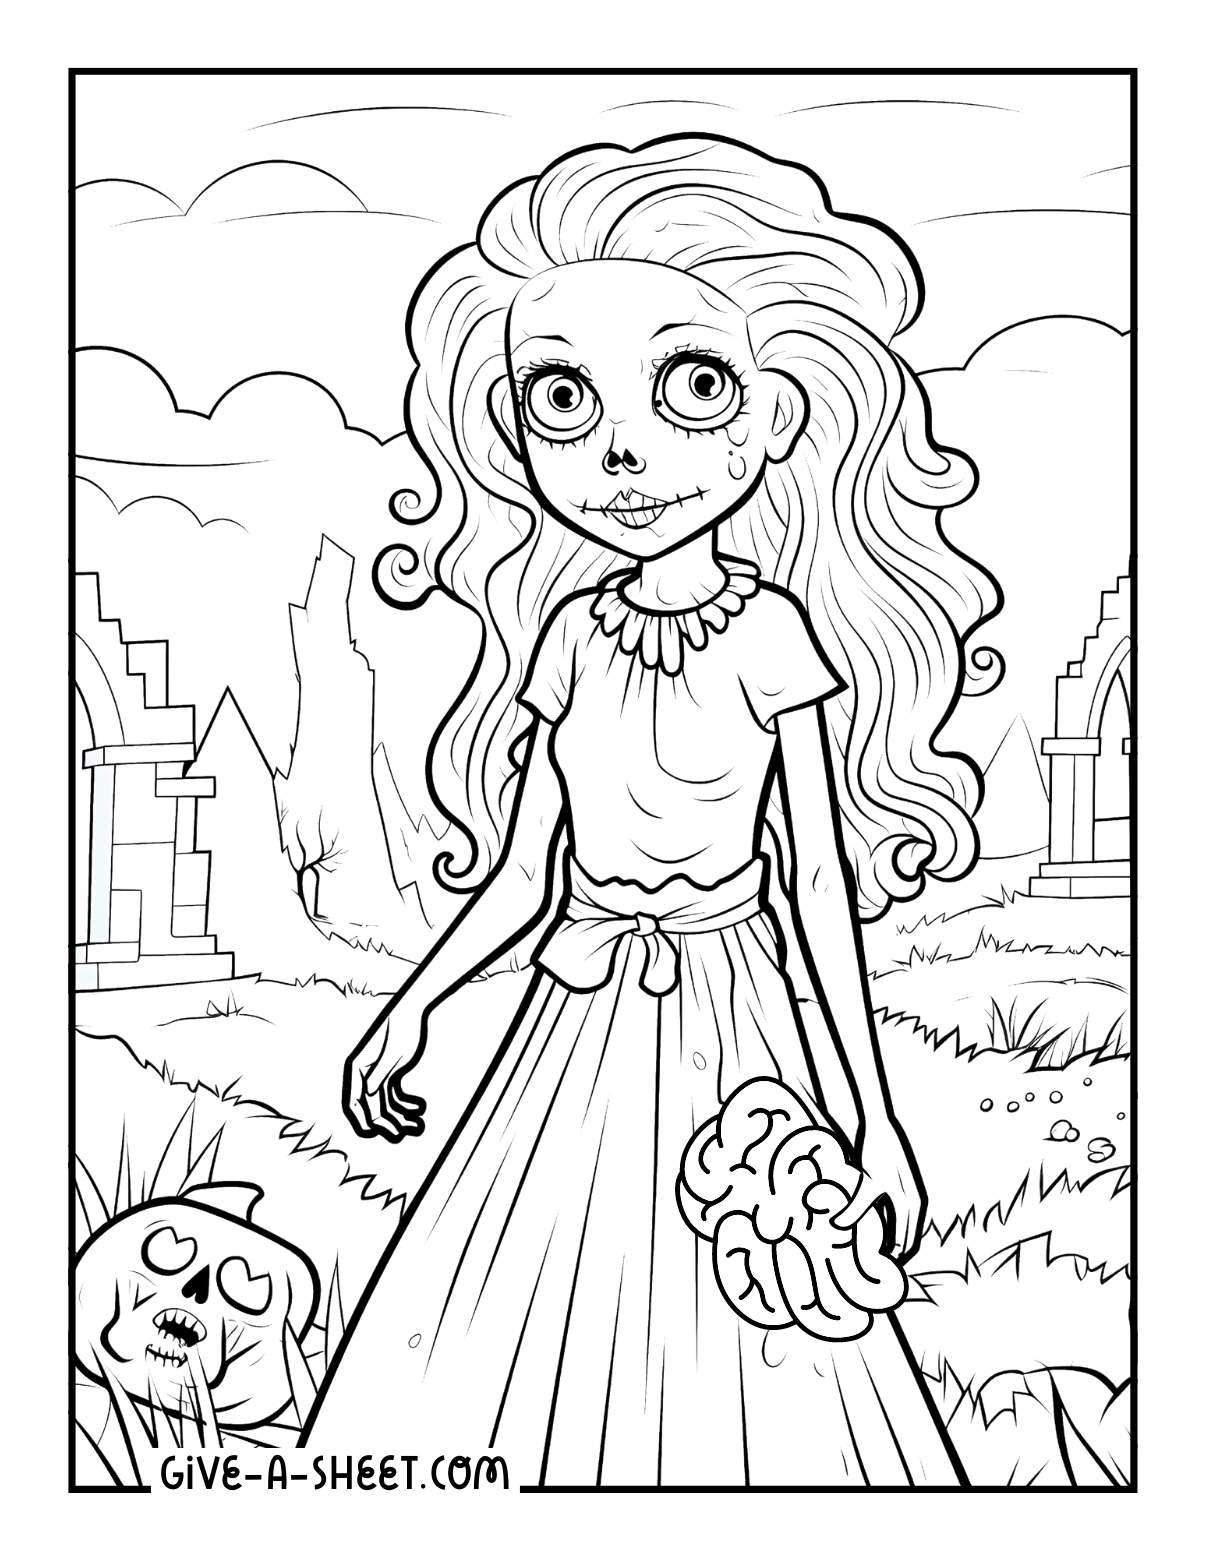 Bride zombie on graves coloring sheet.